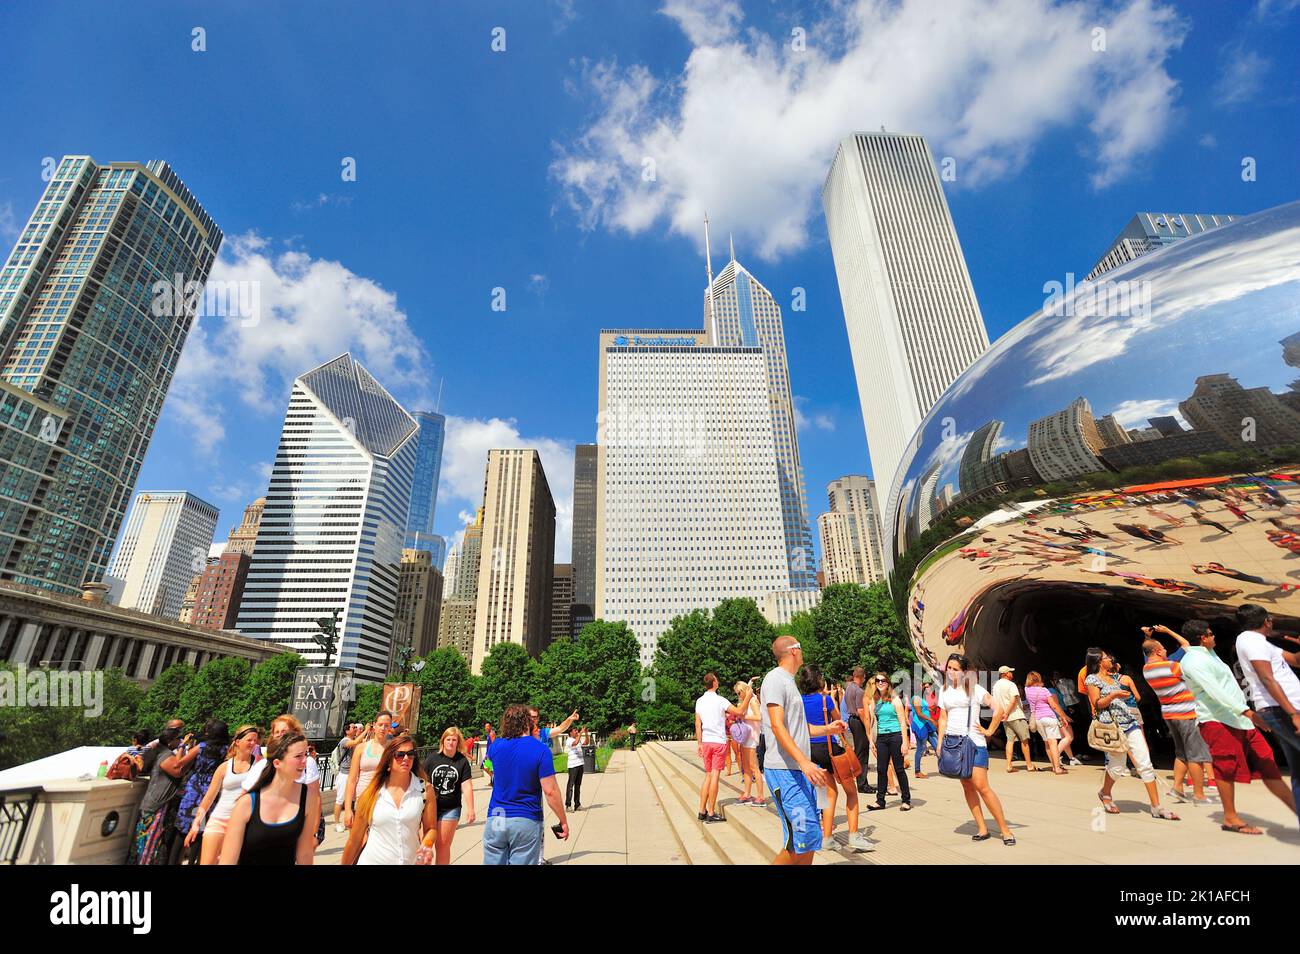 Chicago, Illinois, USA. People flock to one of the city's most popular artistic attractions, the Cloud Gate sculpture in Millennium Park. Stock Photo